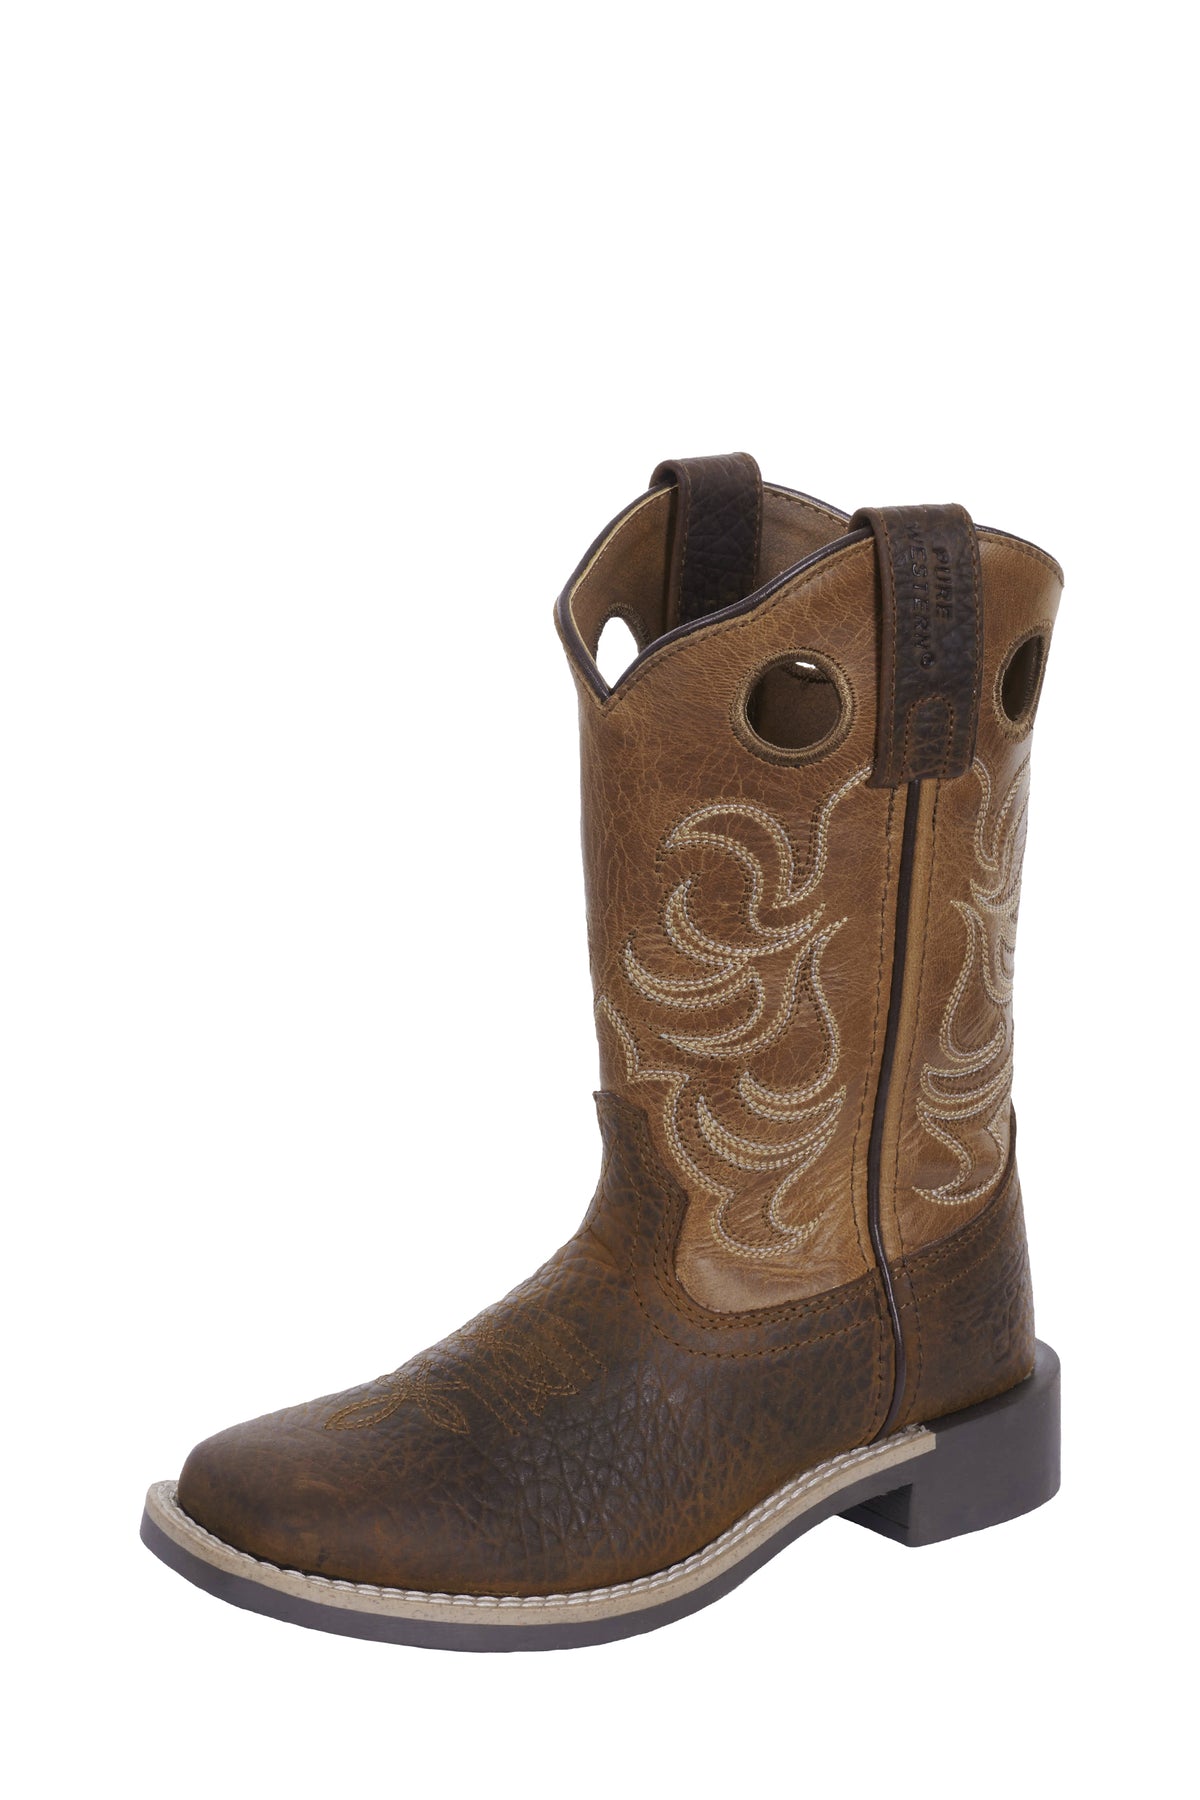 Pure Western Kids Lincoln Boot - Brown/Tan